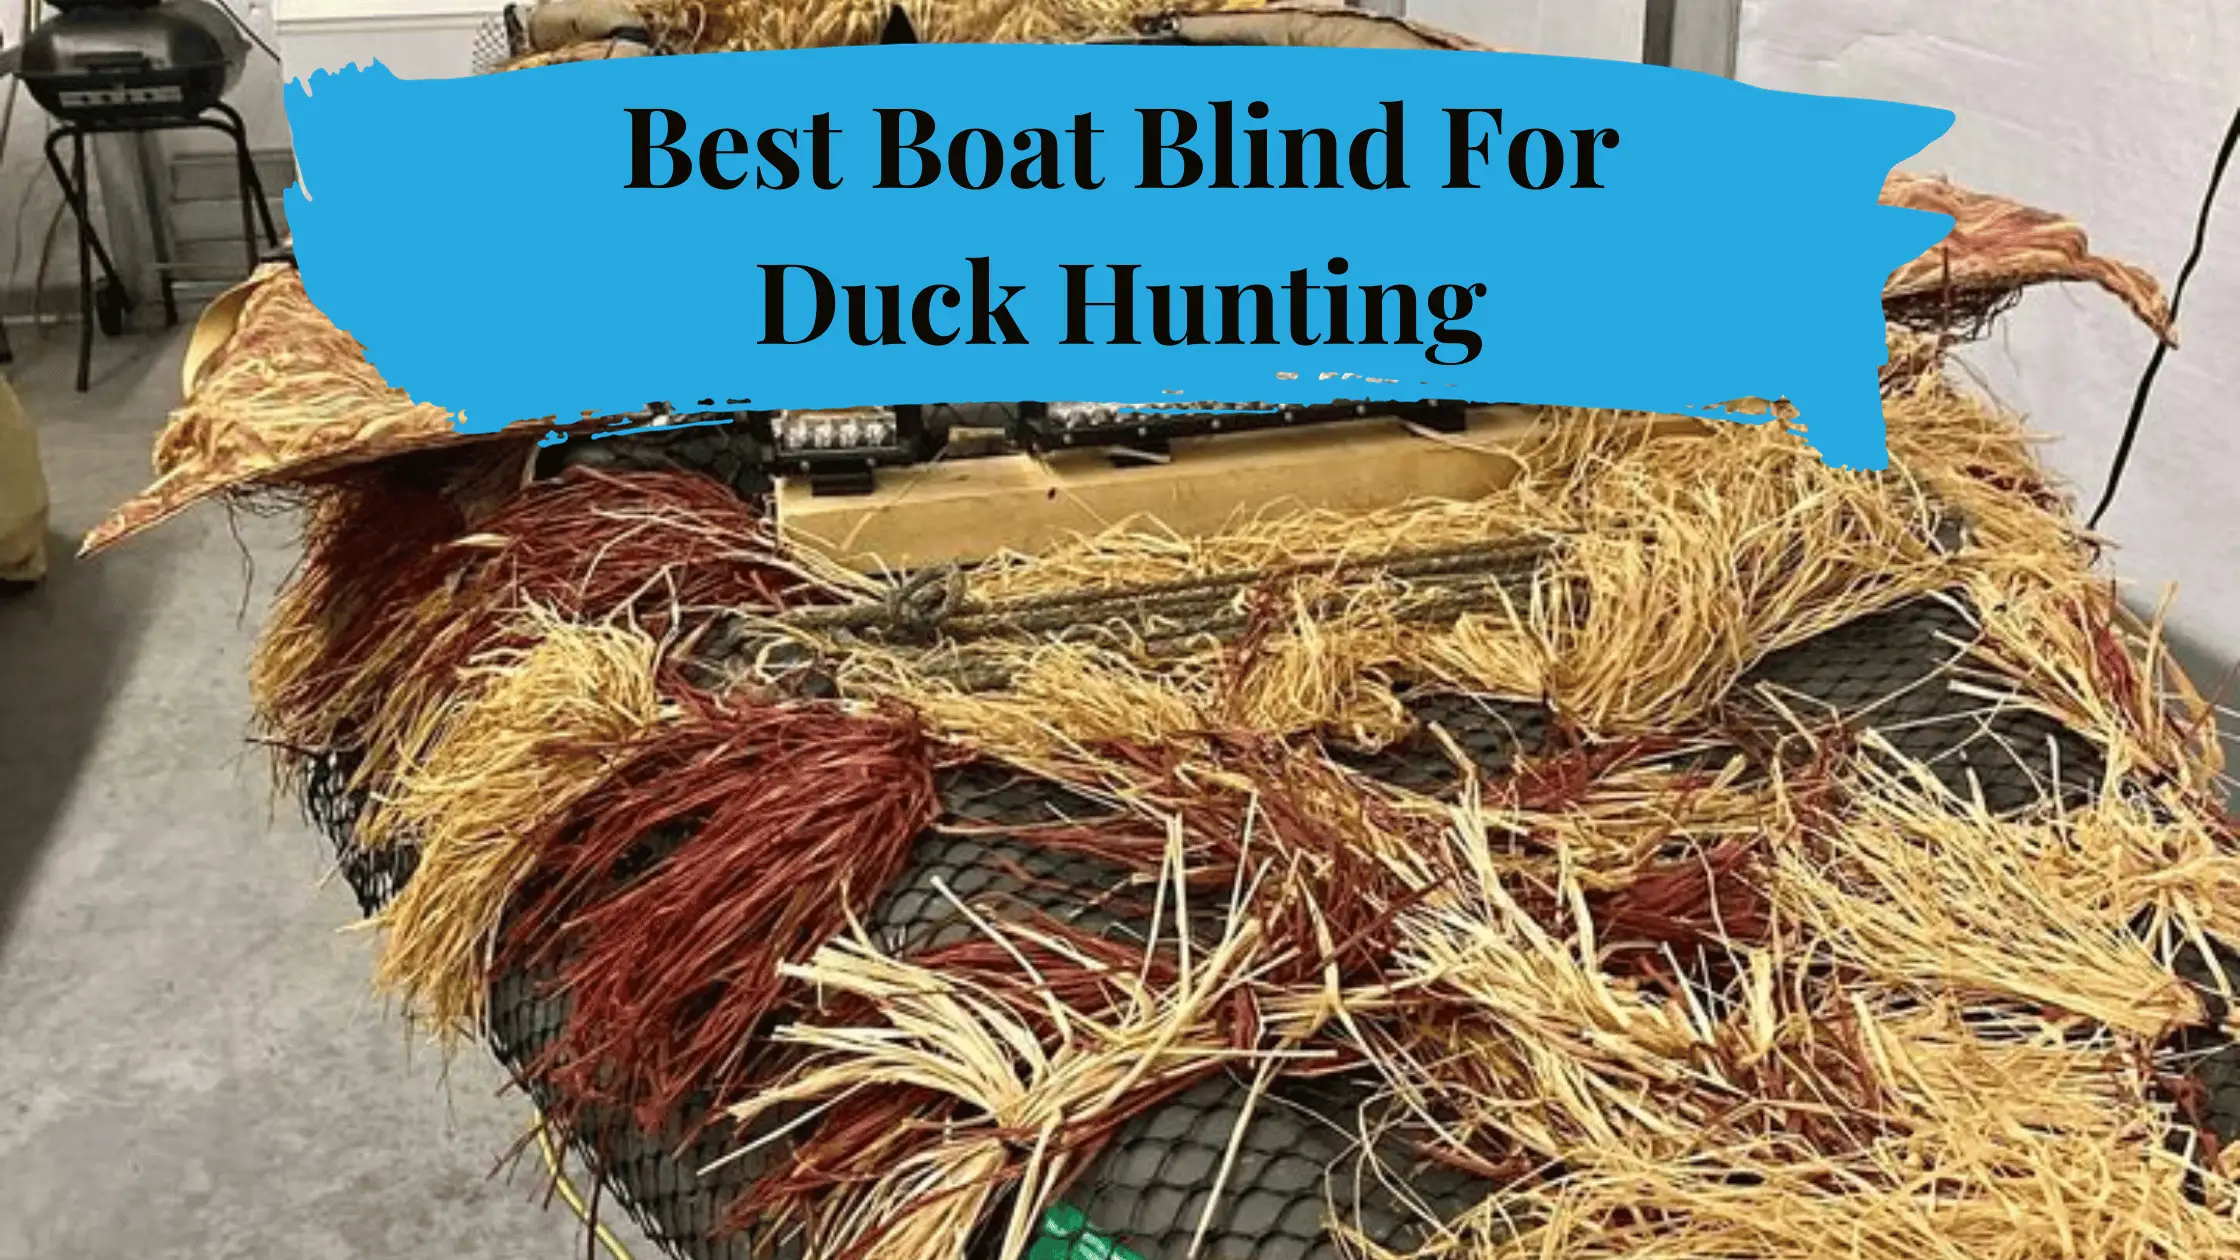 Best Boat Blind For Duck Hunting